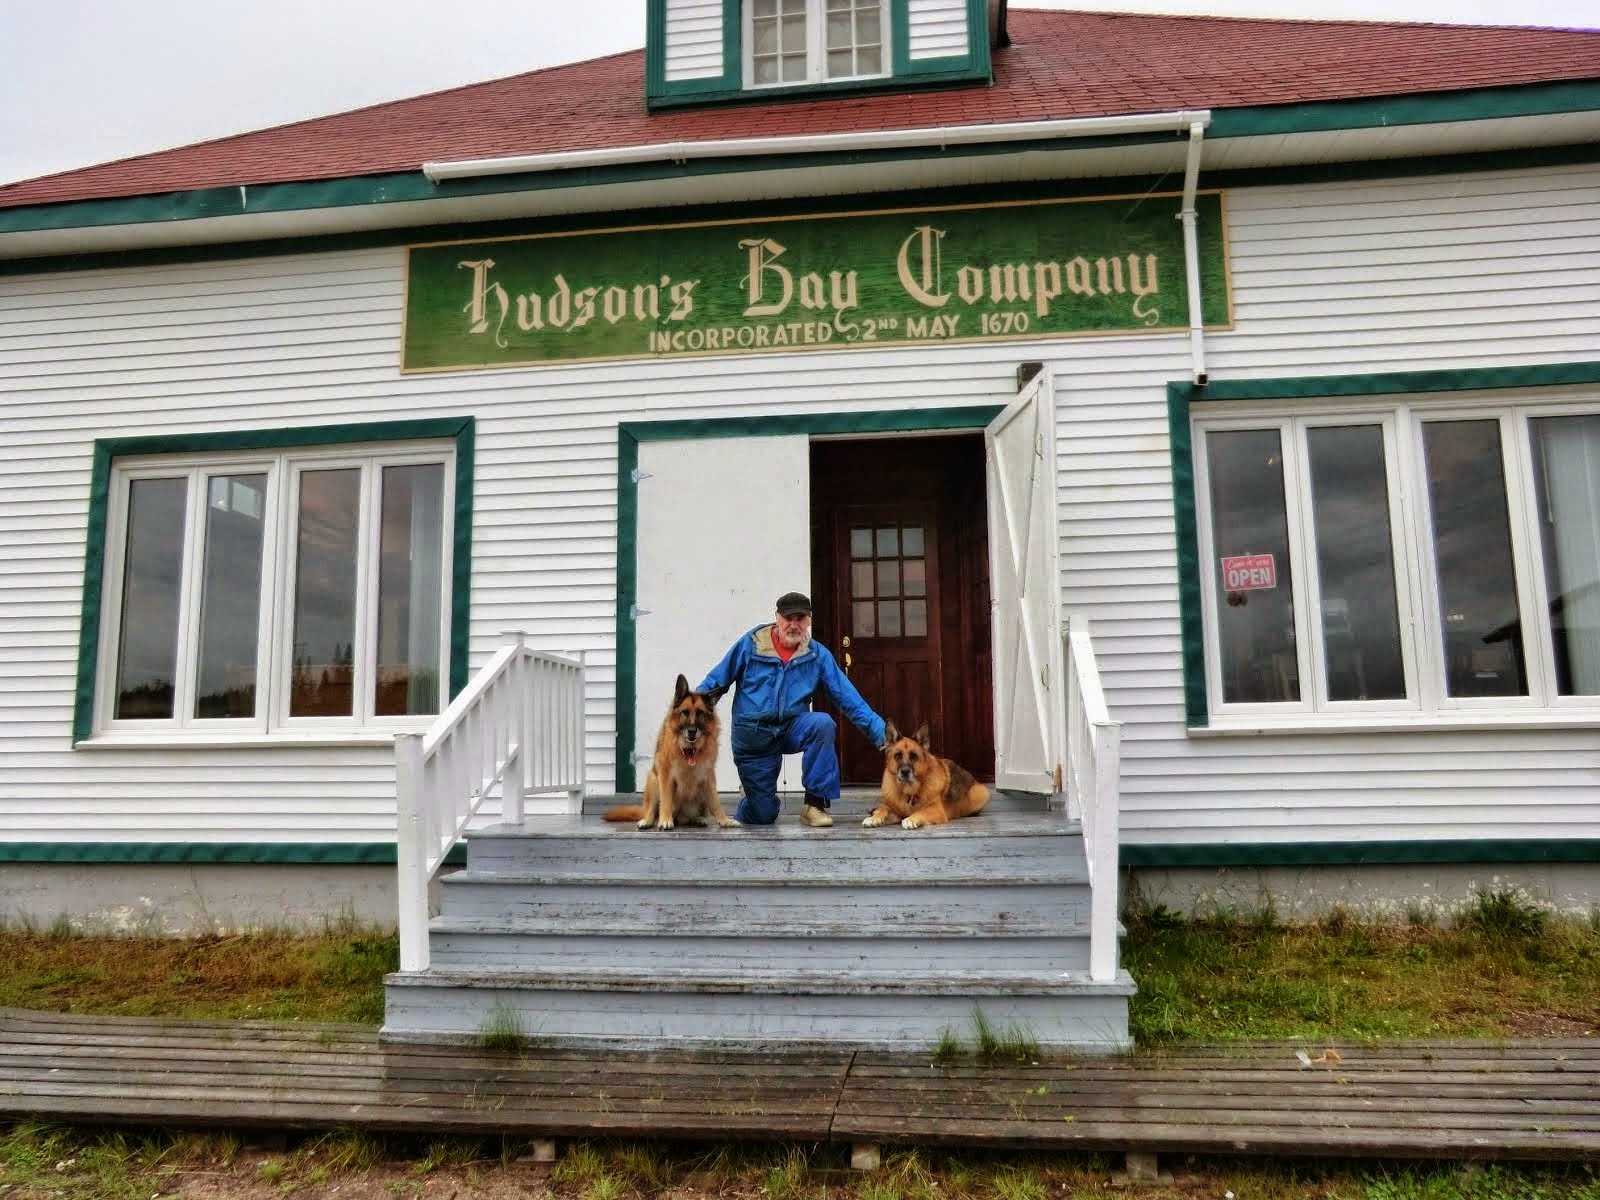 Leben and Erde (with me) at the end of the road in the northeast in Labrador, 2011